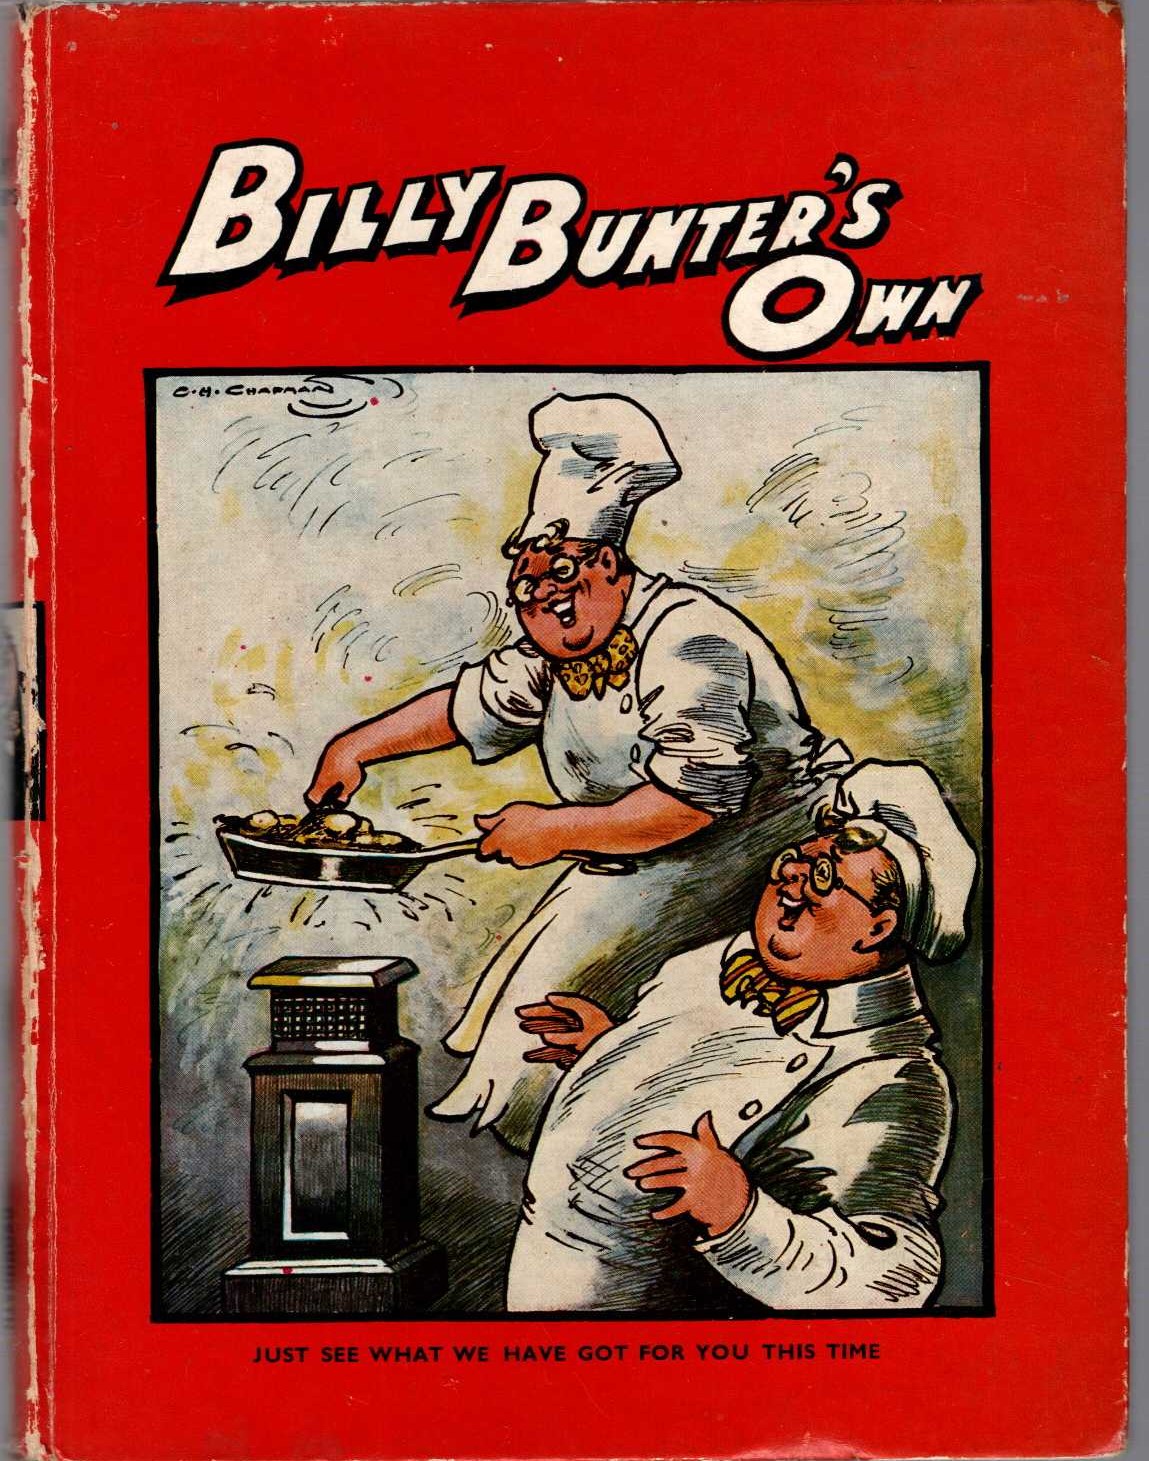 BILLY BUNTER'S OWN (Annual) front book cover image